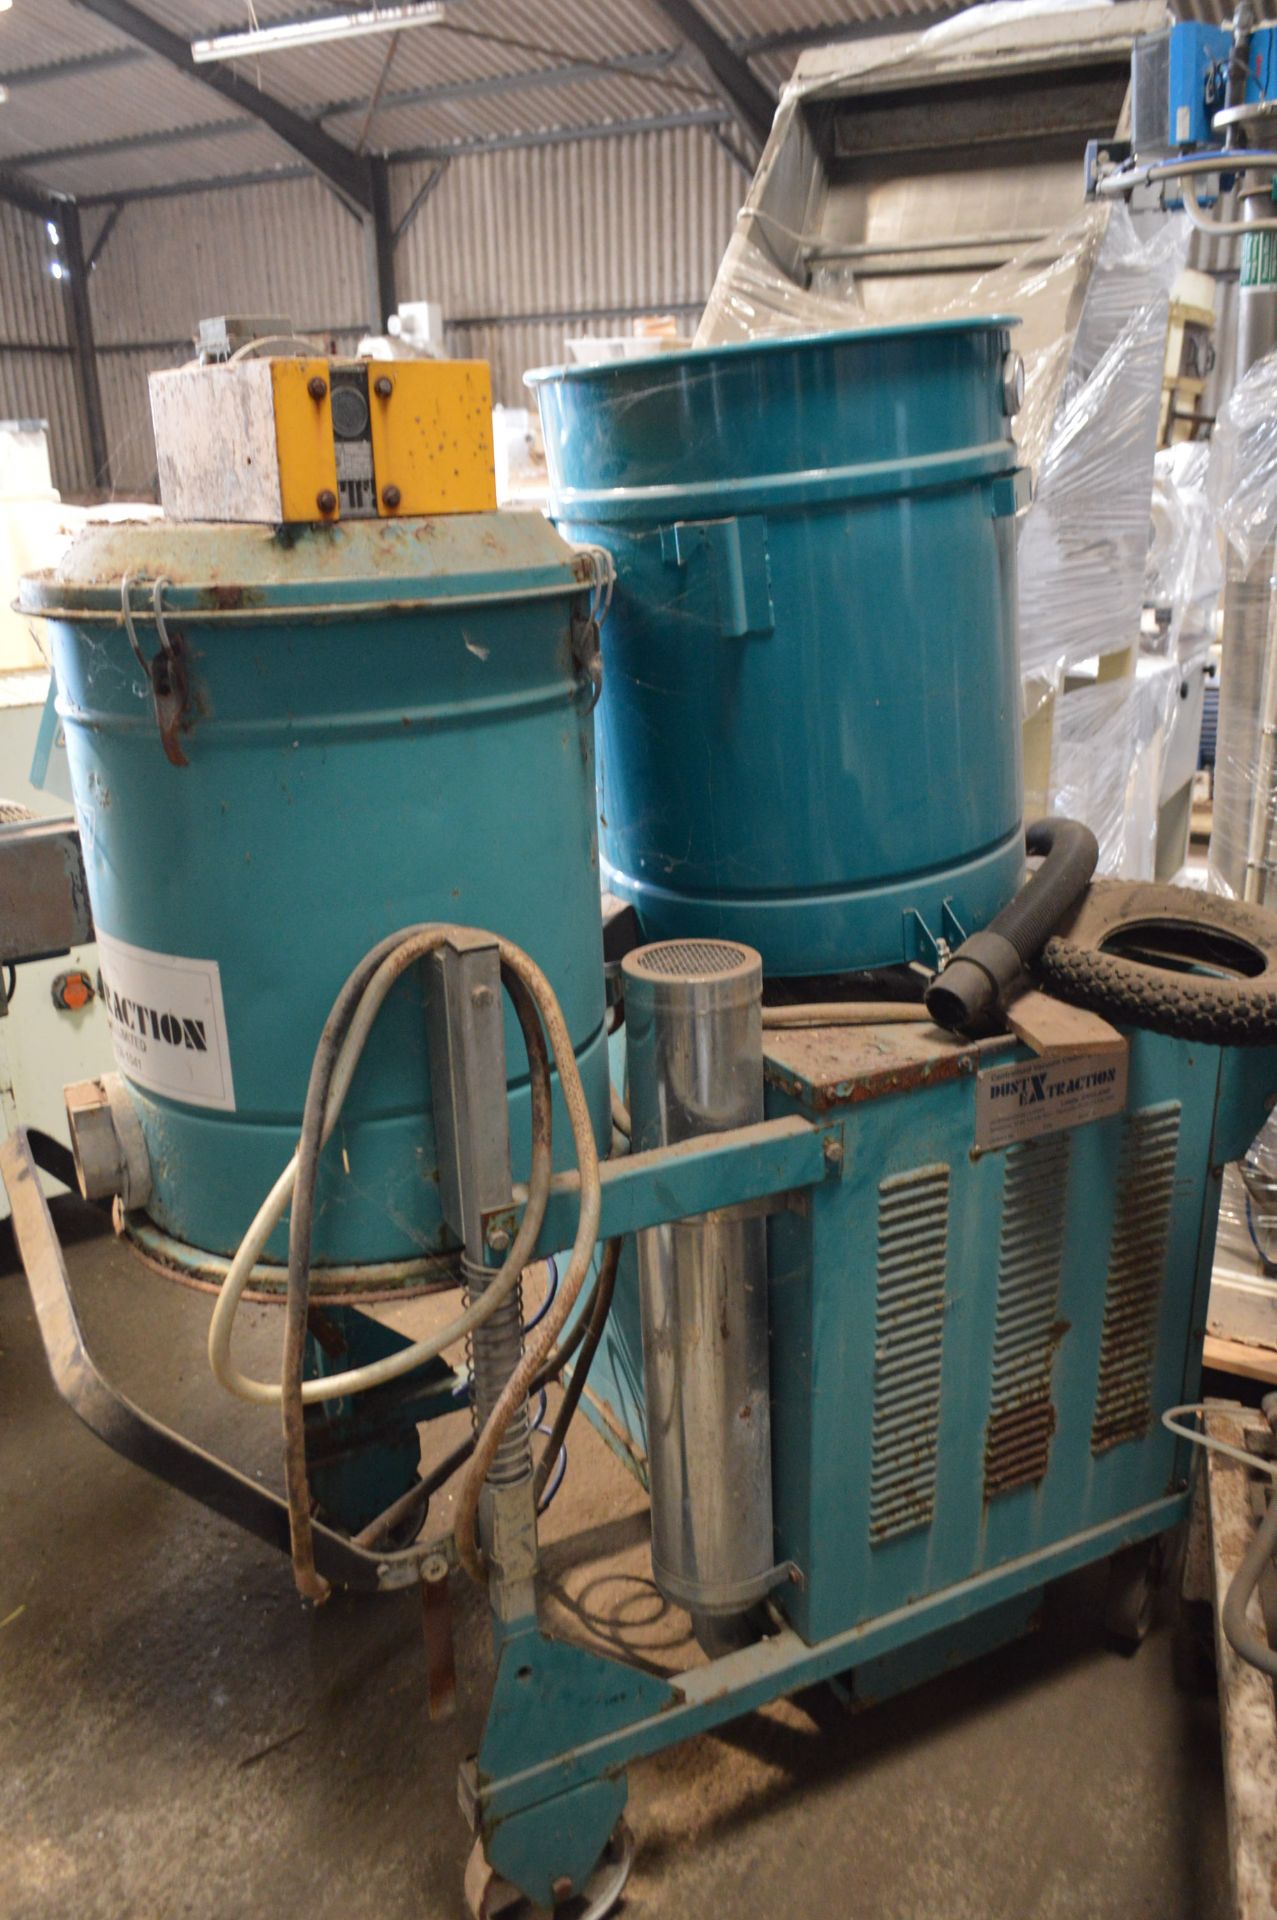 Dust Extraction Ltd 3707 Portable Industrial Vacuum System, serial no. 15610